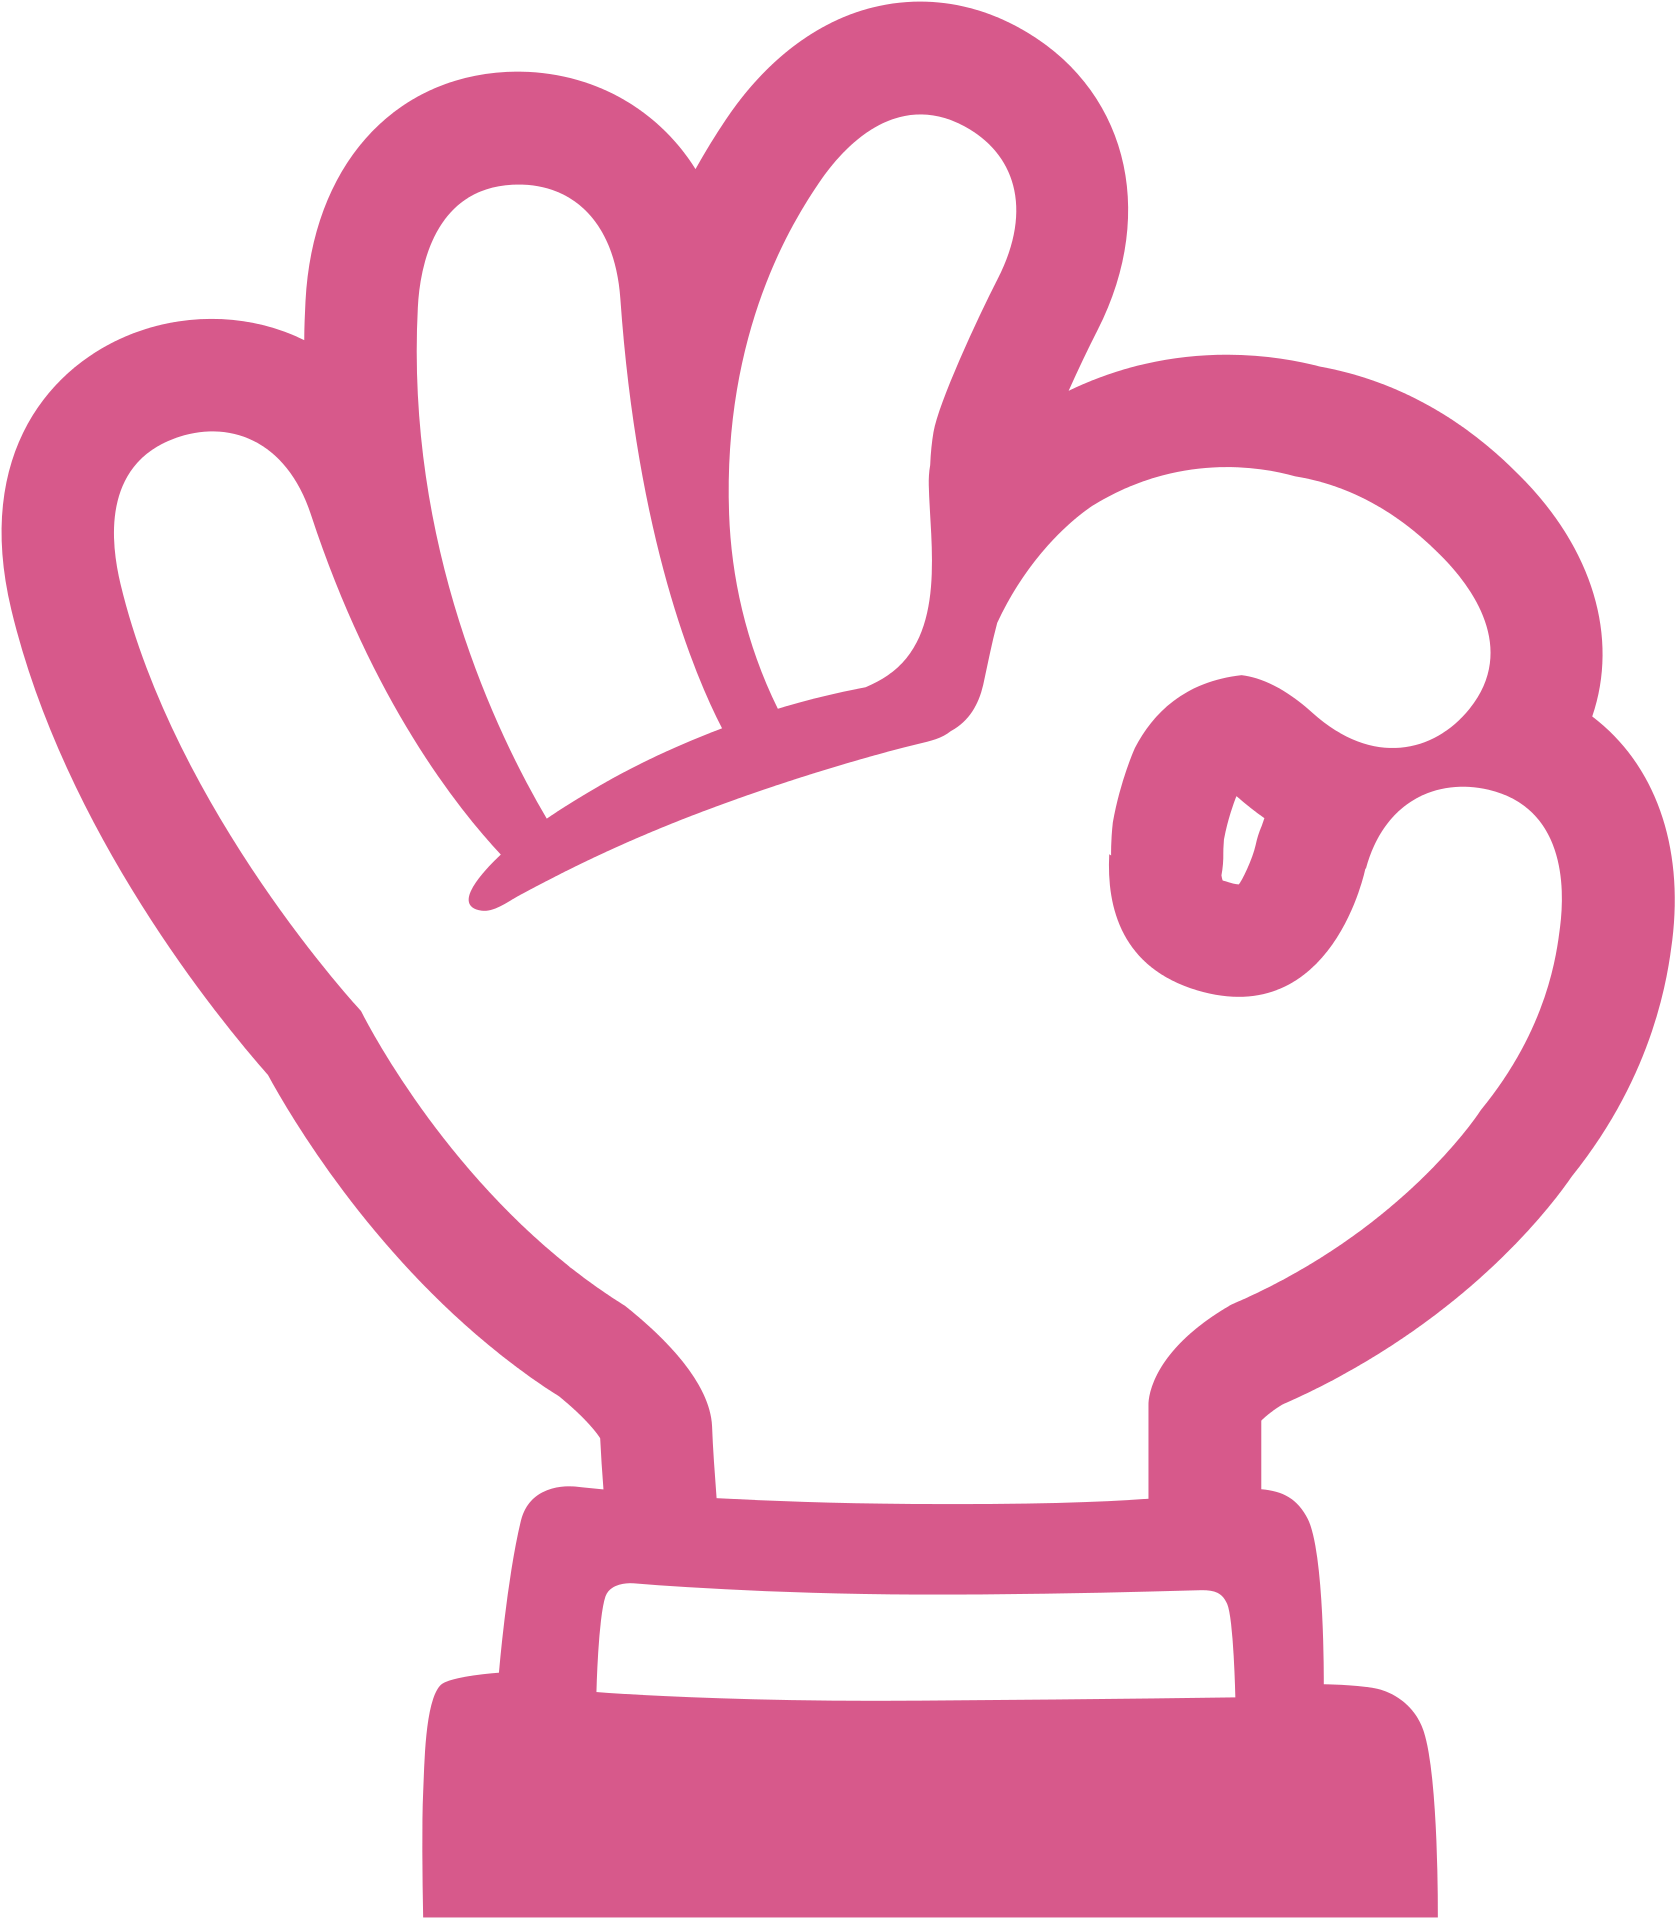 A Cartoon Hand With A Pink Outline